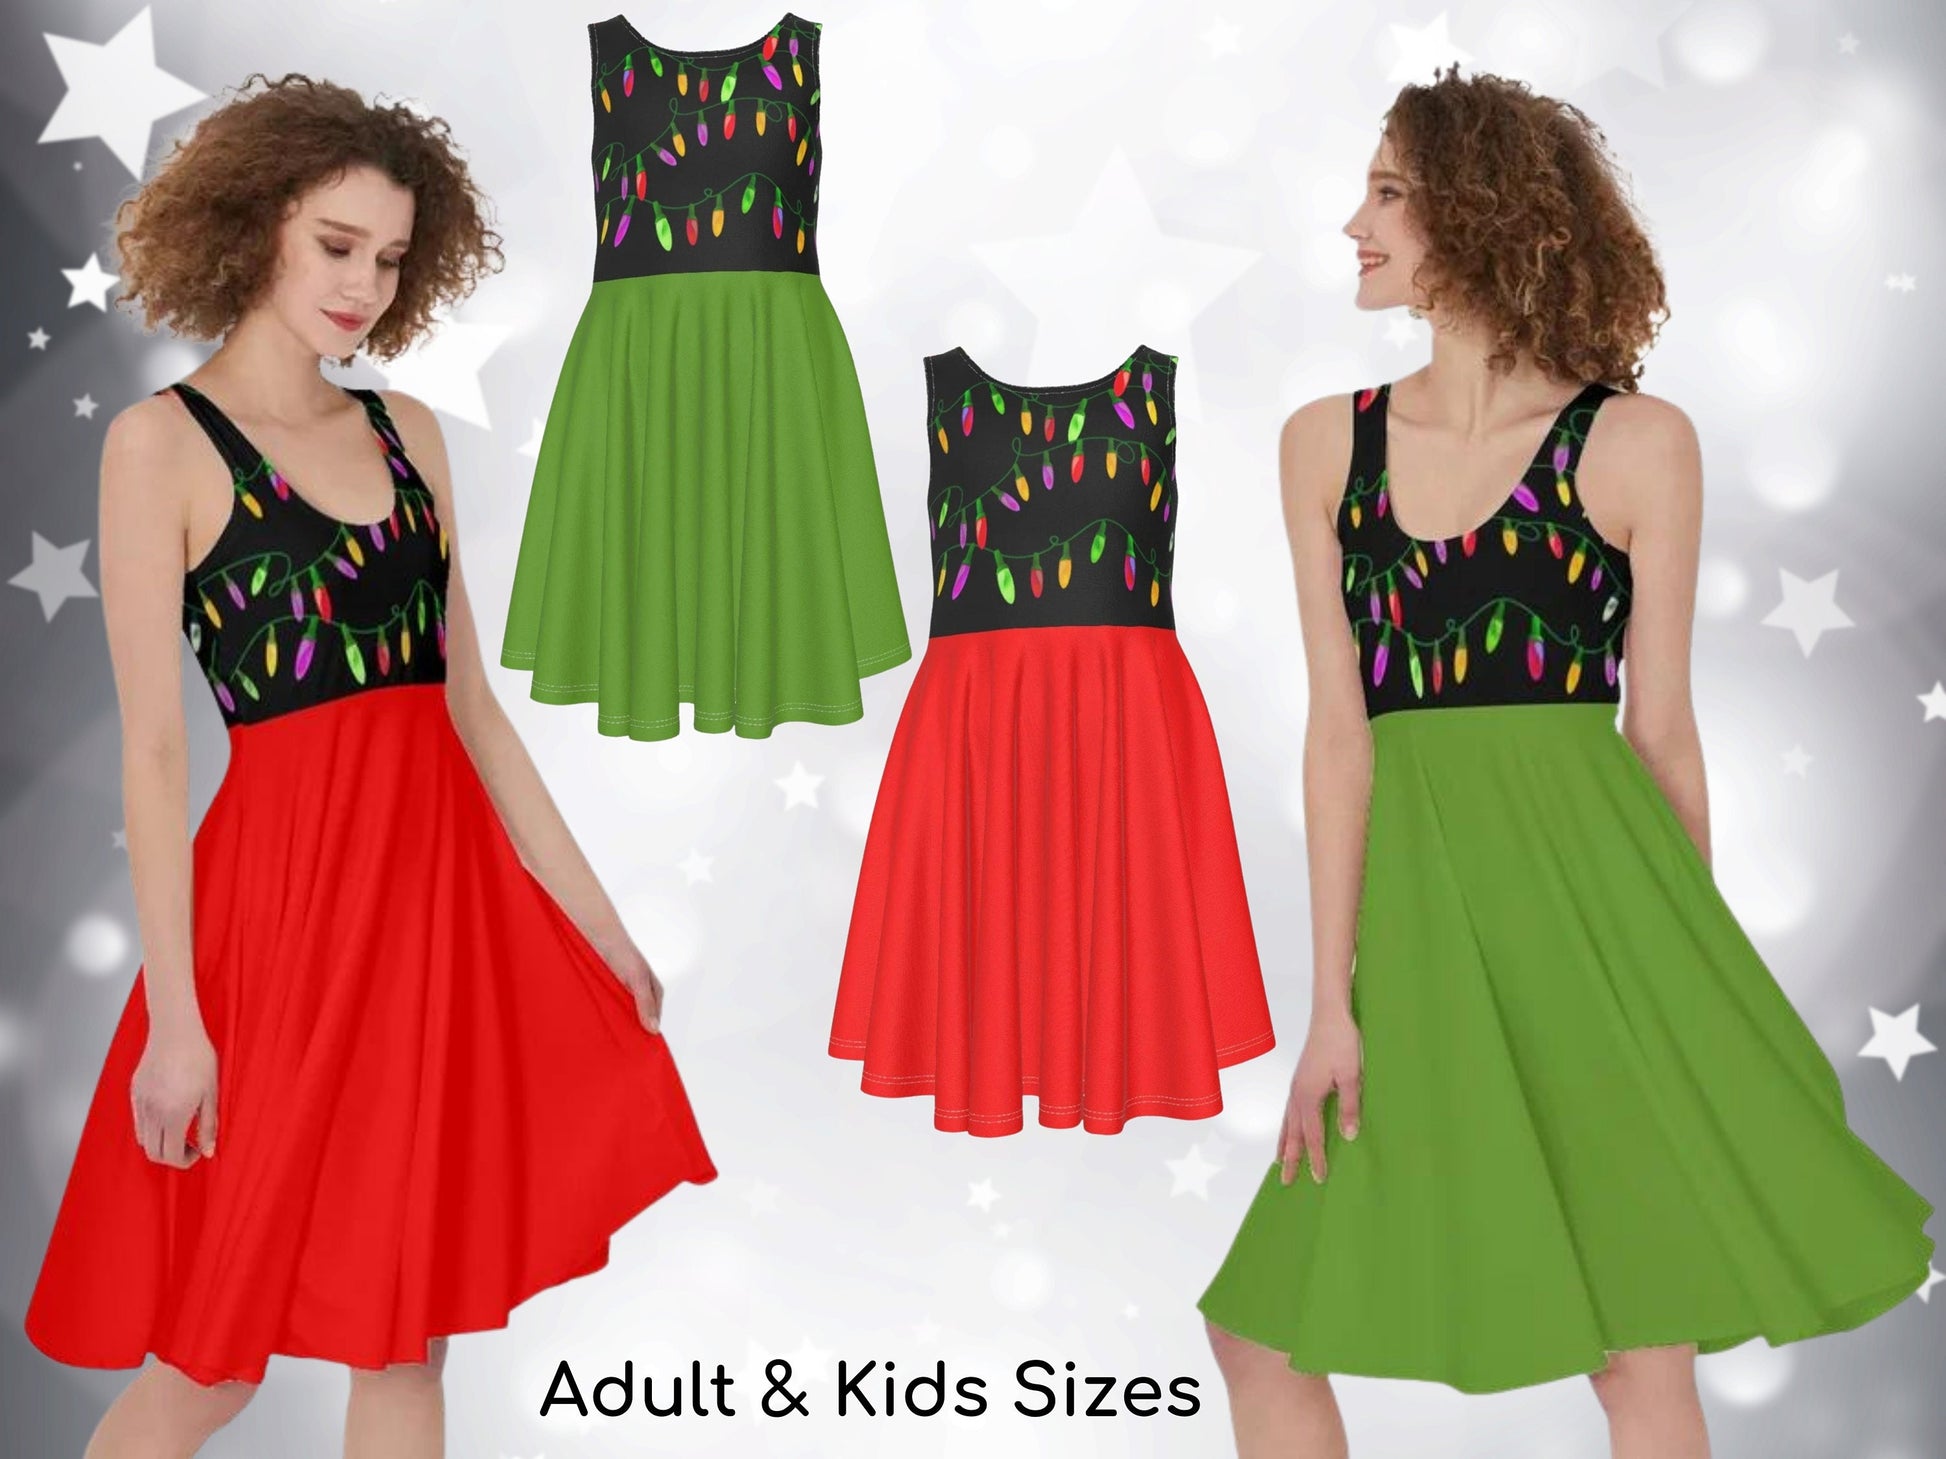 Christmas Dress Skater Style for Adults & Kids in Red and Green, Christmas Lights, Christmas Party, Christmas Present, Birthday Gift, - Chloe Lambertin